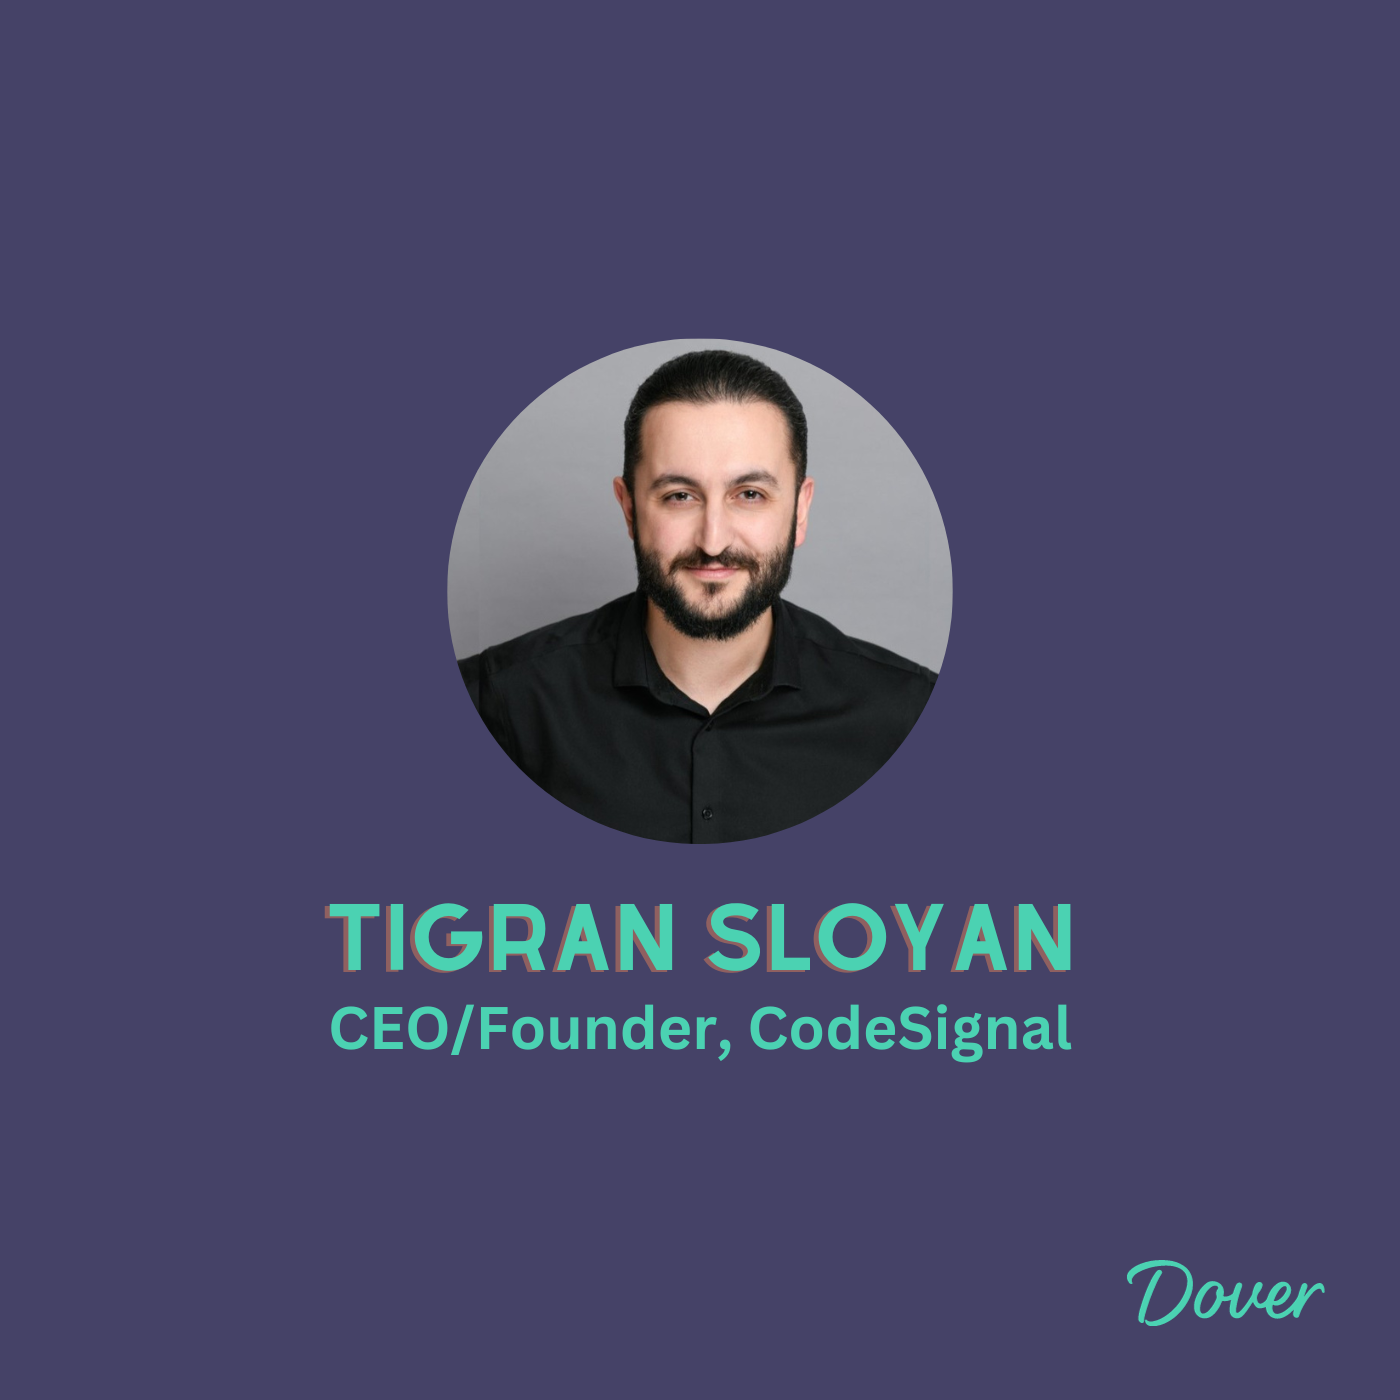 EPISODE #16: Addressing Humanity’s Talent Problem: Tigran Sloyan, CEO and Co-founder of CodeSignal, Shares How We Can Better Evaluate Talent